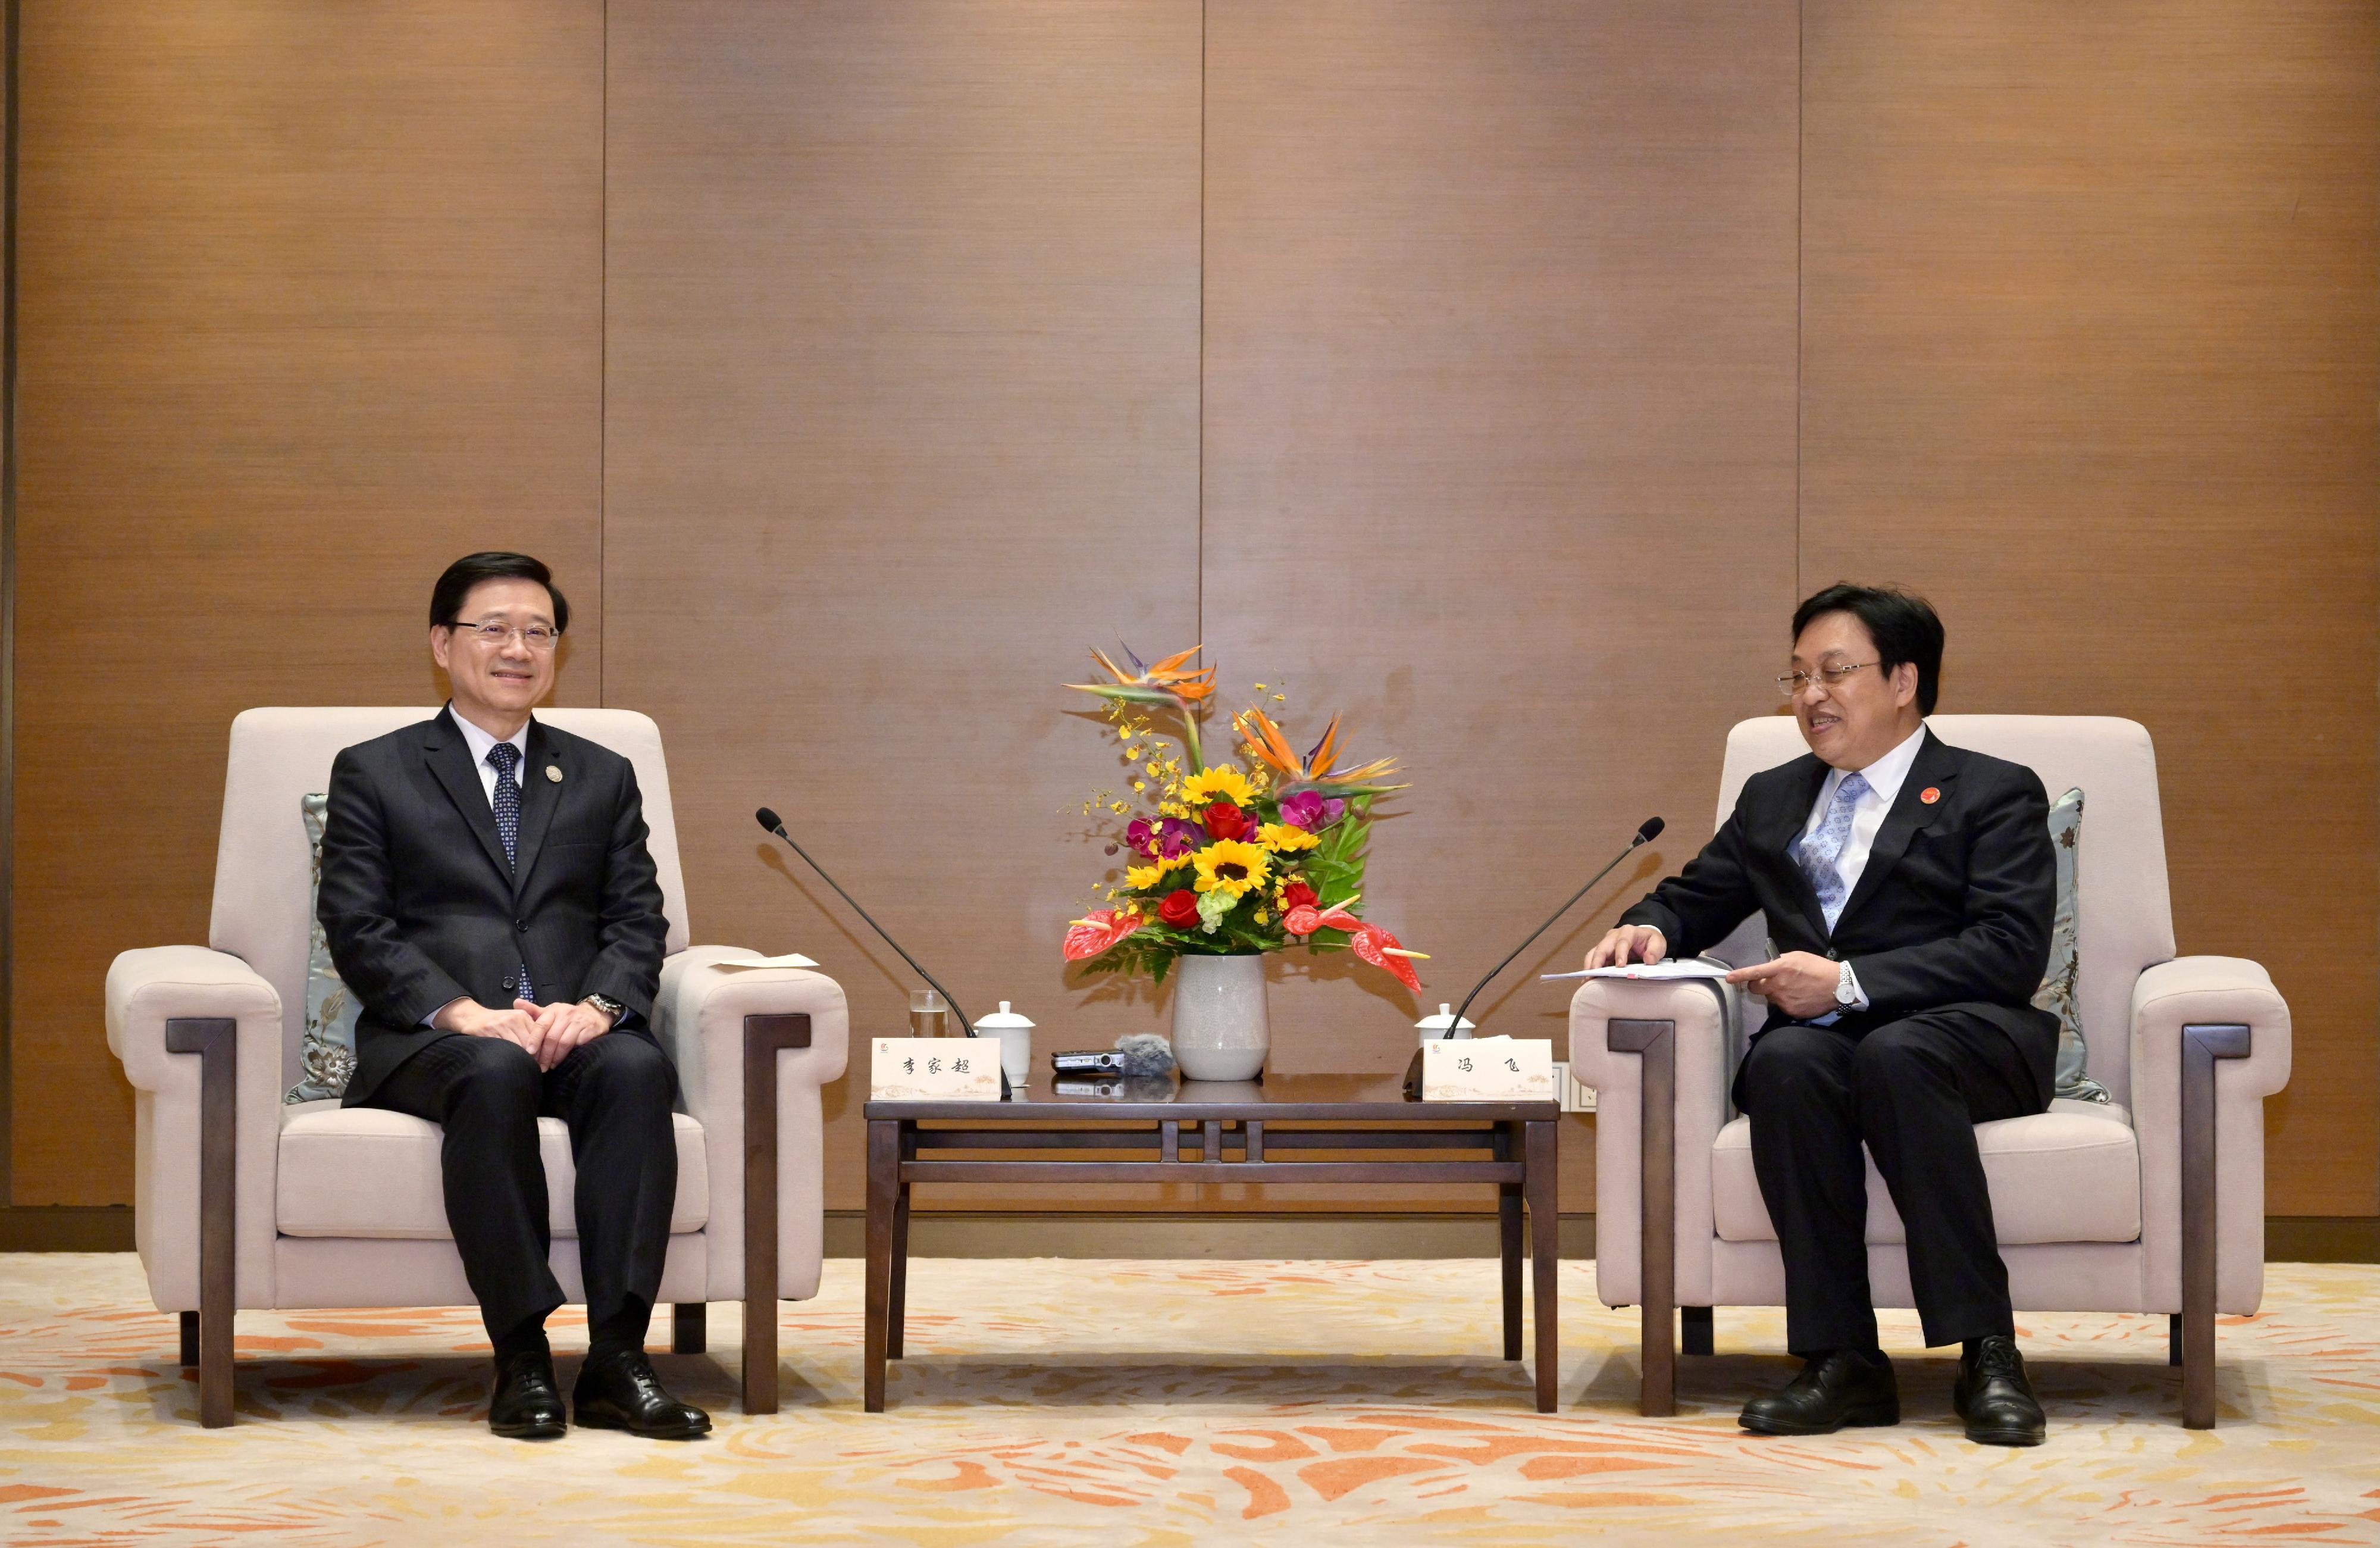 The Chief Executive, Mr John Lee (left), meets with the Secretary of the CPC Hainan Provincial Committee and the Governor of Hainan Province, Mr Feng Fei (right), during the Boao Forum for Asia Annual Conference 2023 in Hainan today (March 29).